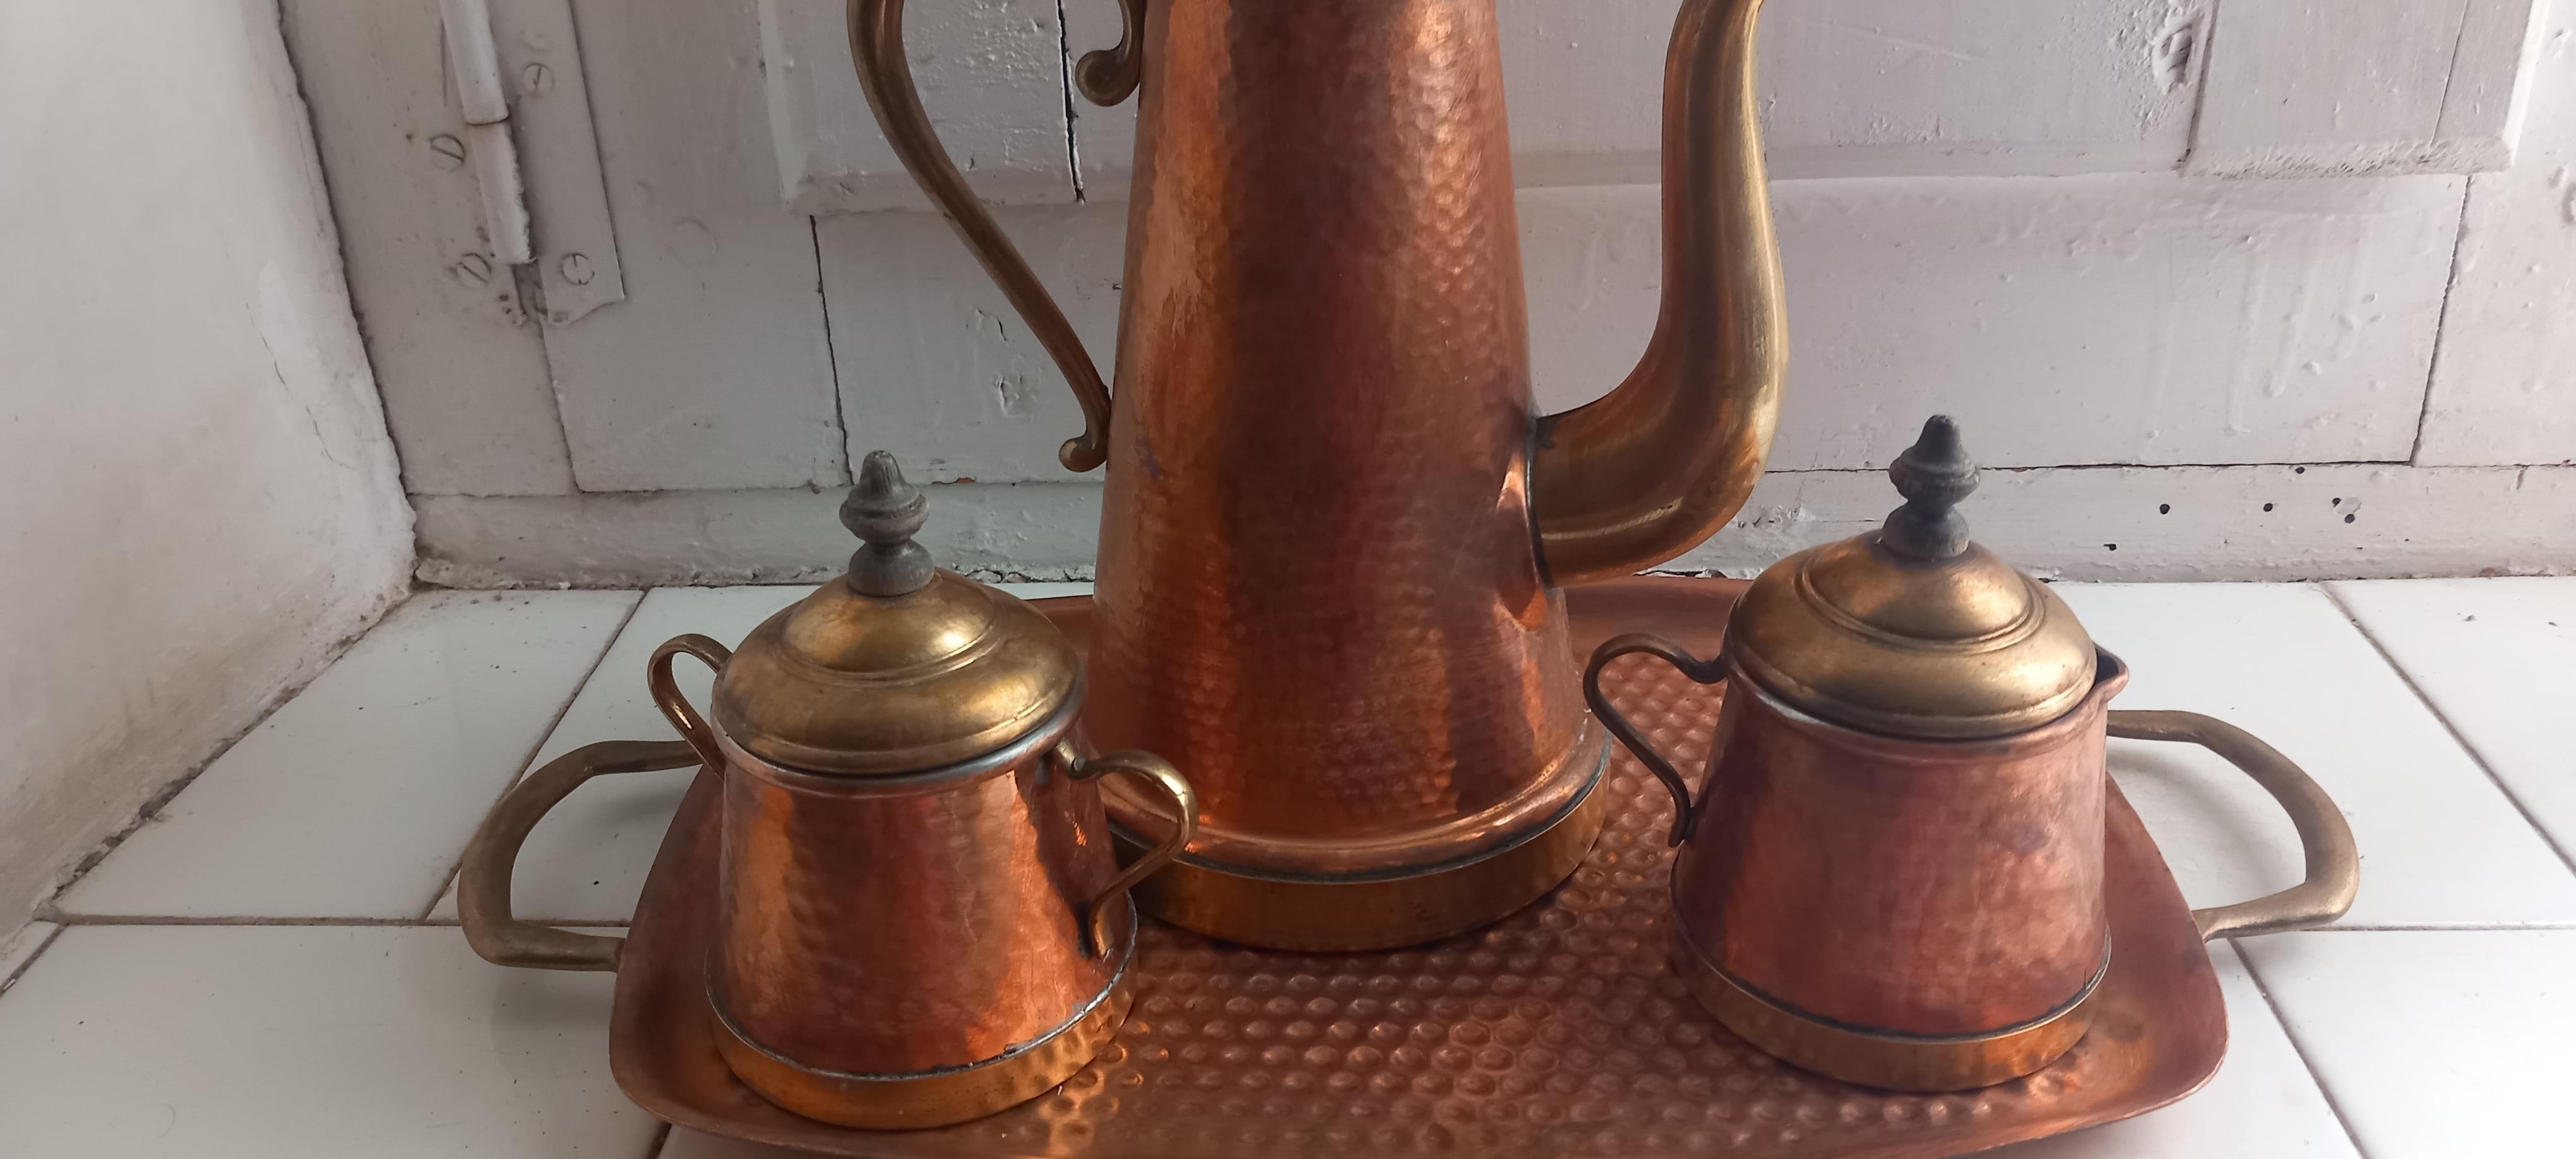 Copper and Brass Coffee or Tea set, Very Decorative  Early 20th Century For Sale 7